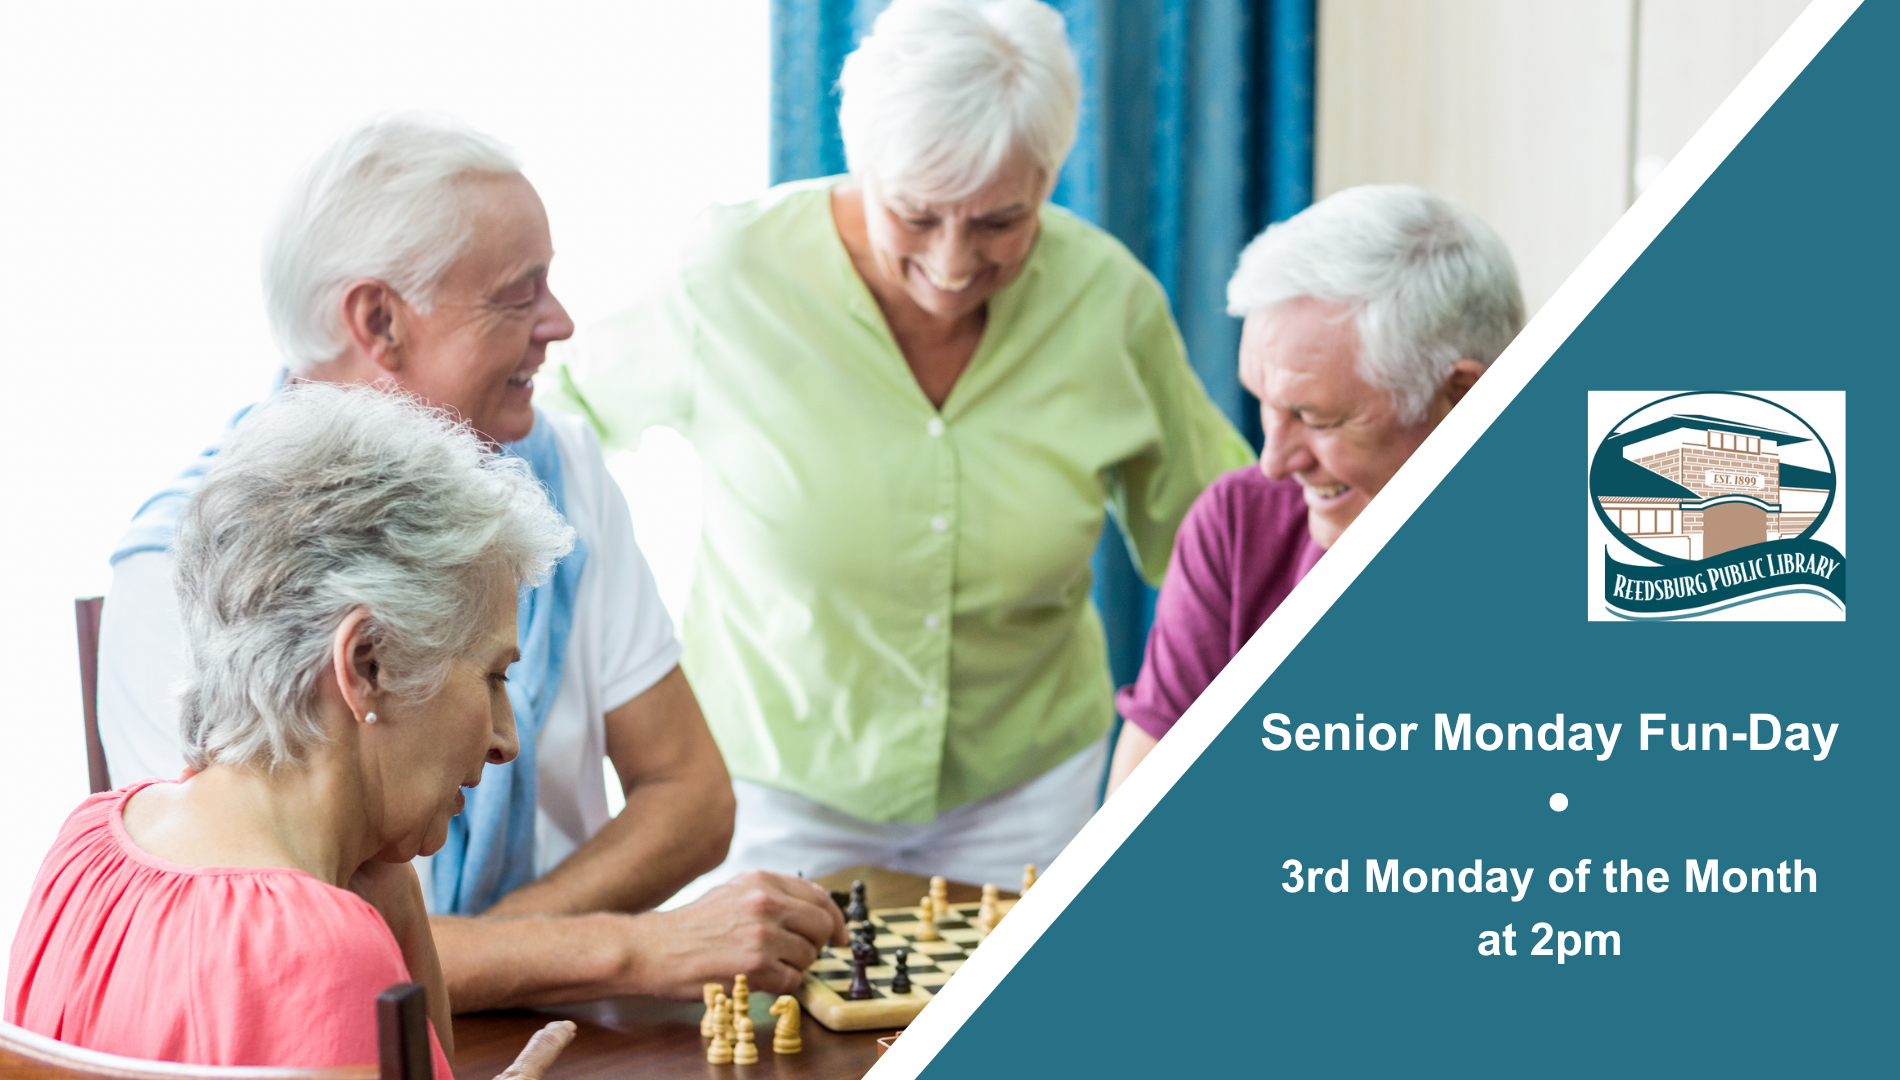 Image of senior enjoying a game of chess with caption "Senior Monday Fun-Day. 3rd Monday of the month at 2pm".